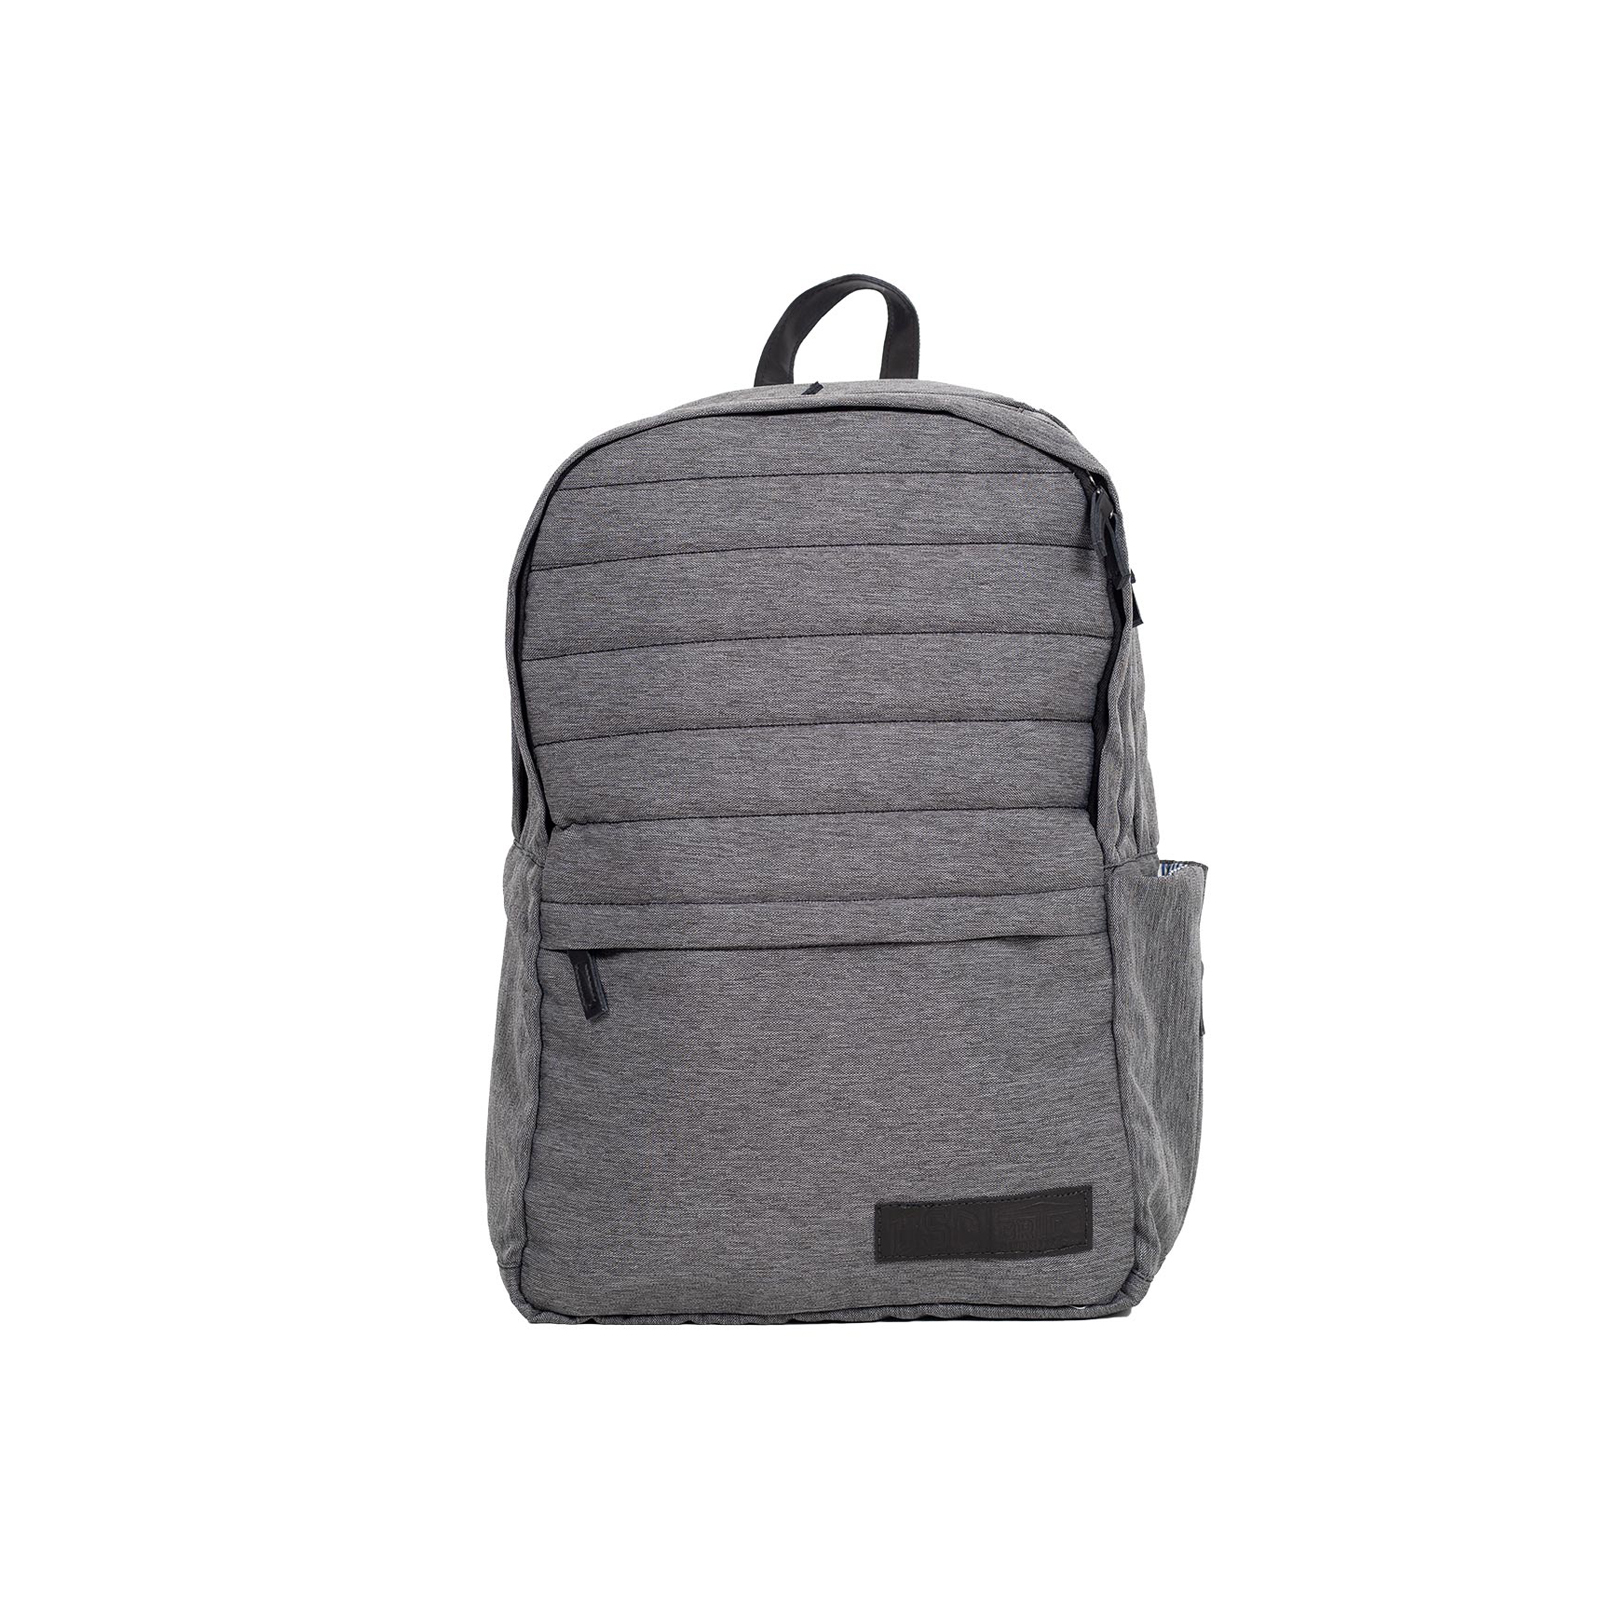 USC Trojans Space Gray Day Backpack